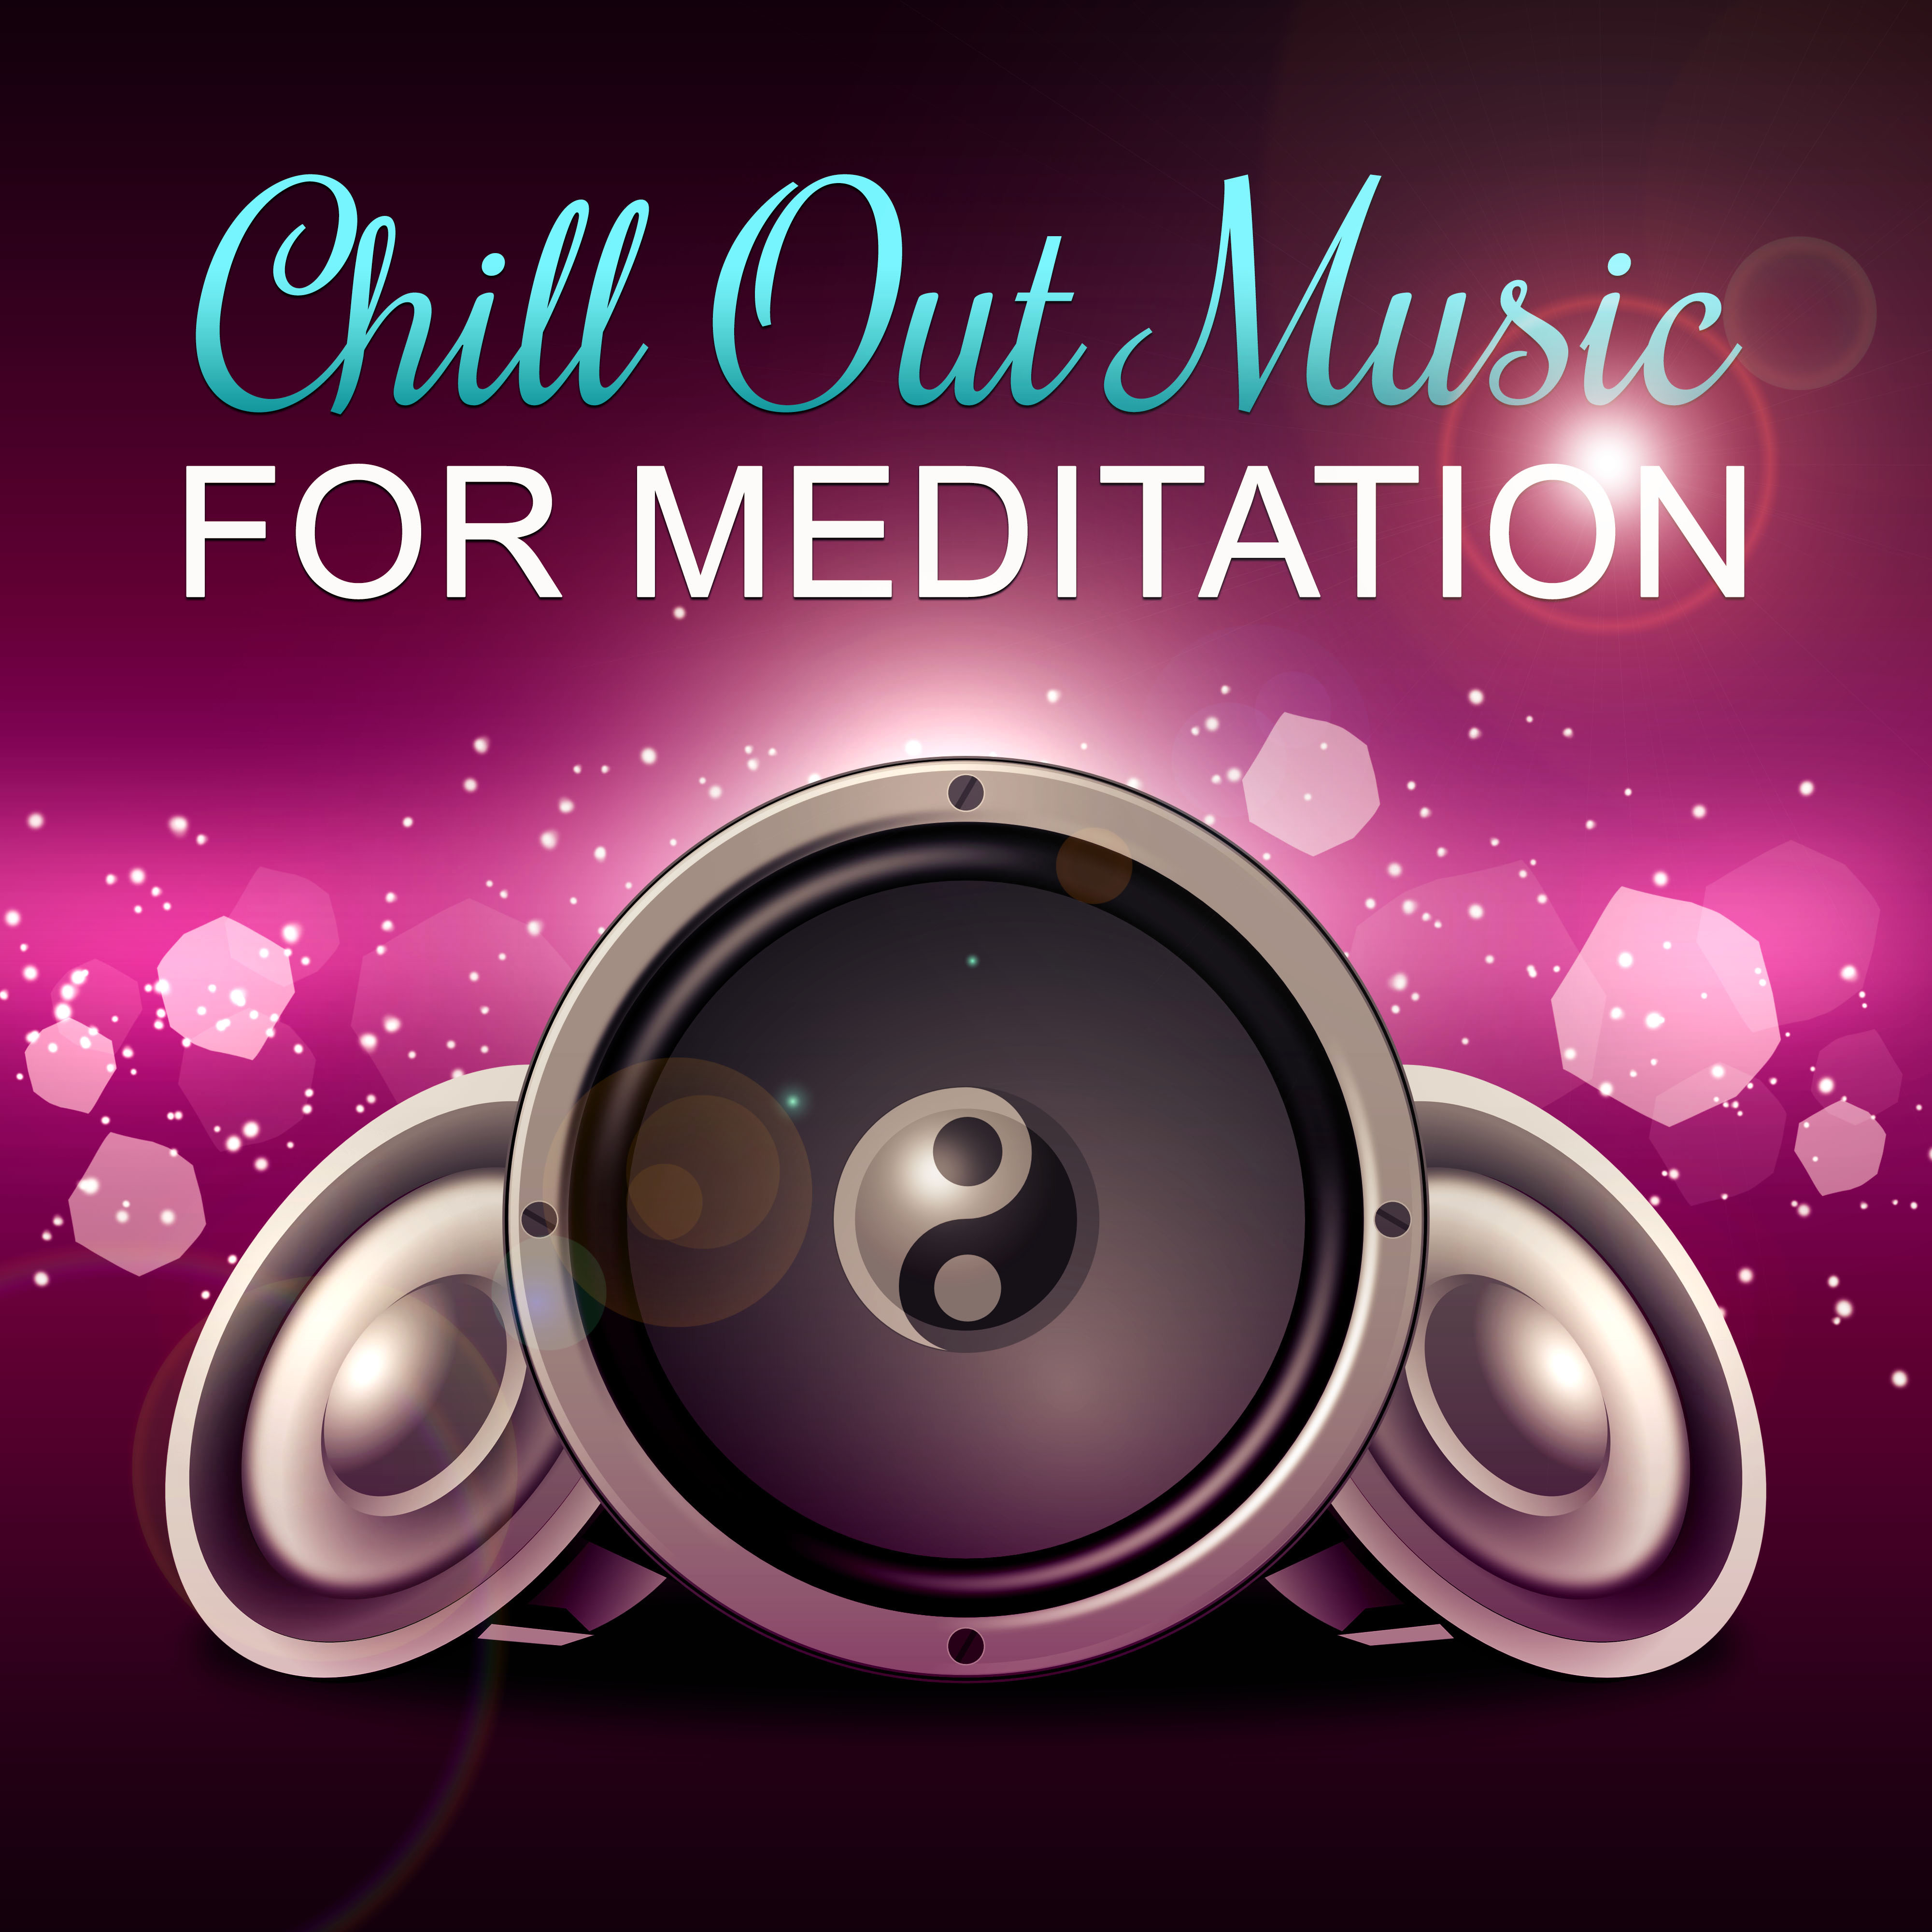 Chill Out Music for Meditation  Buddha Zen Chill Out, Radio Hits